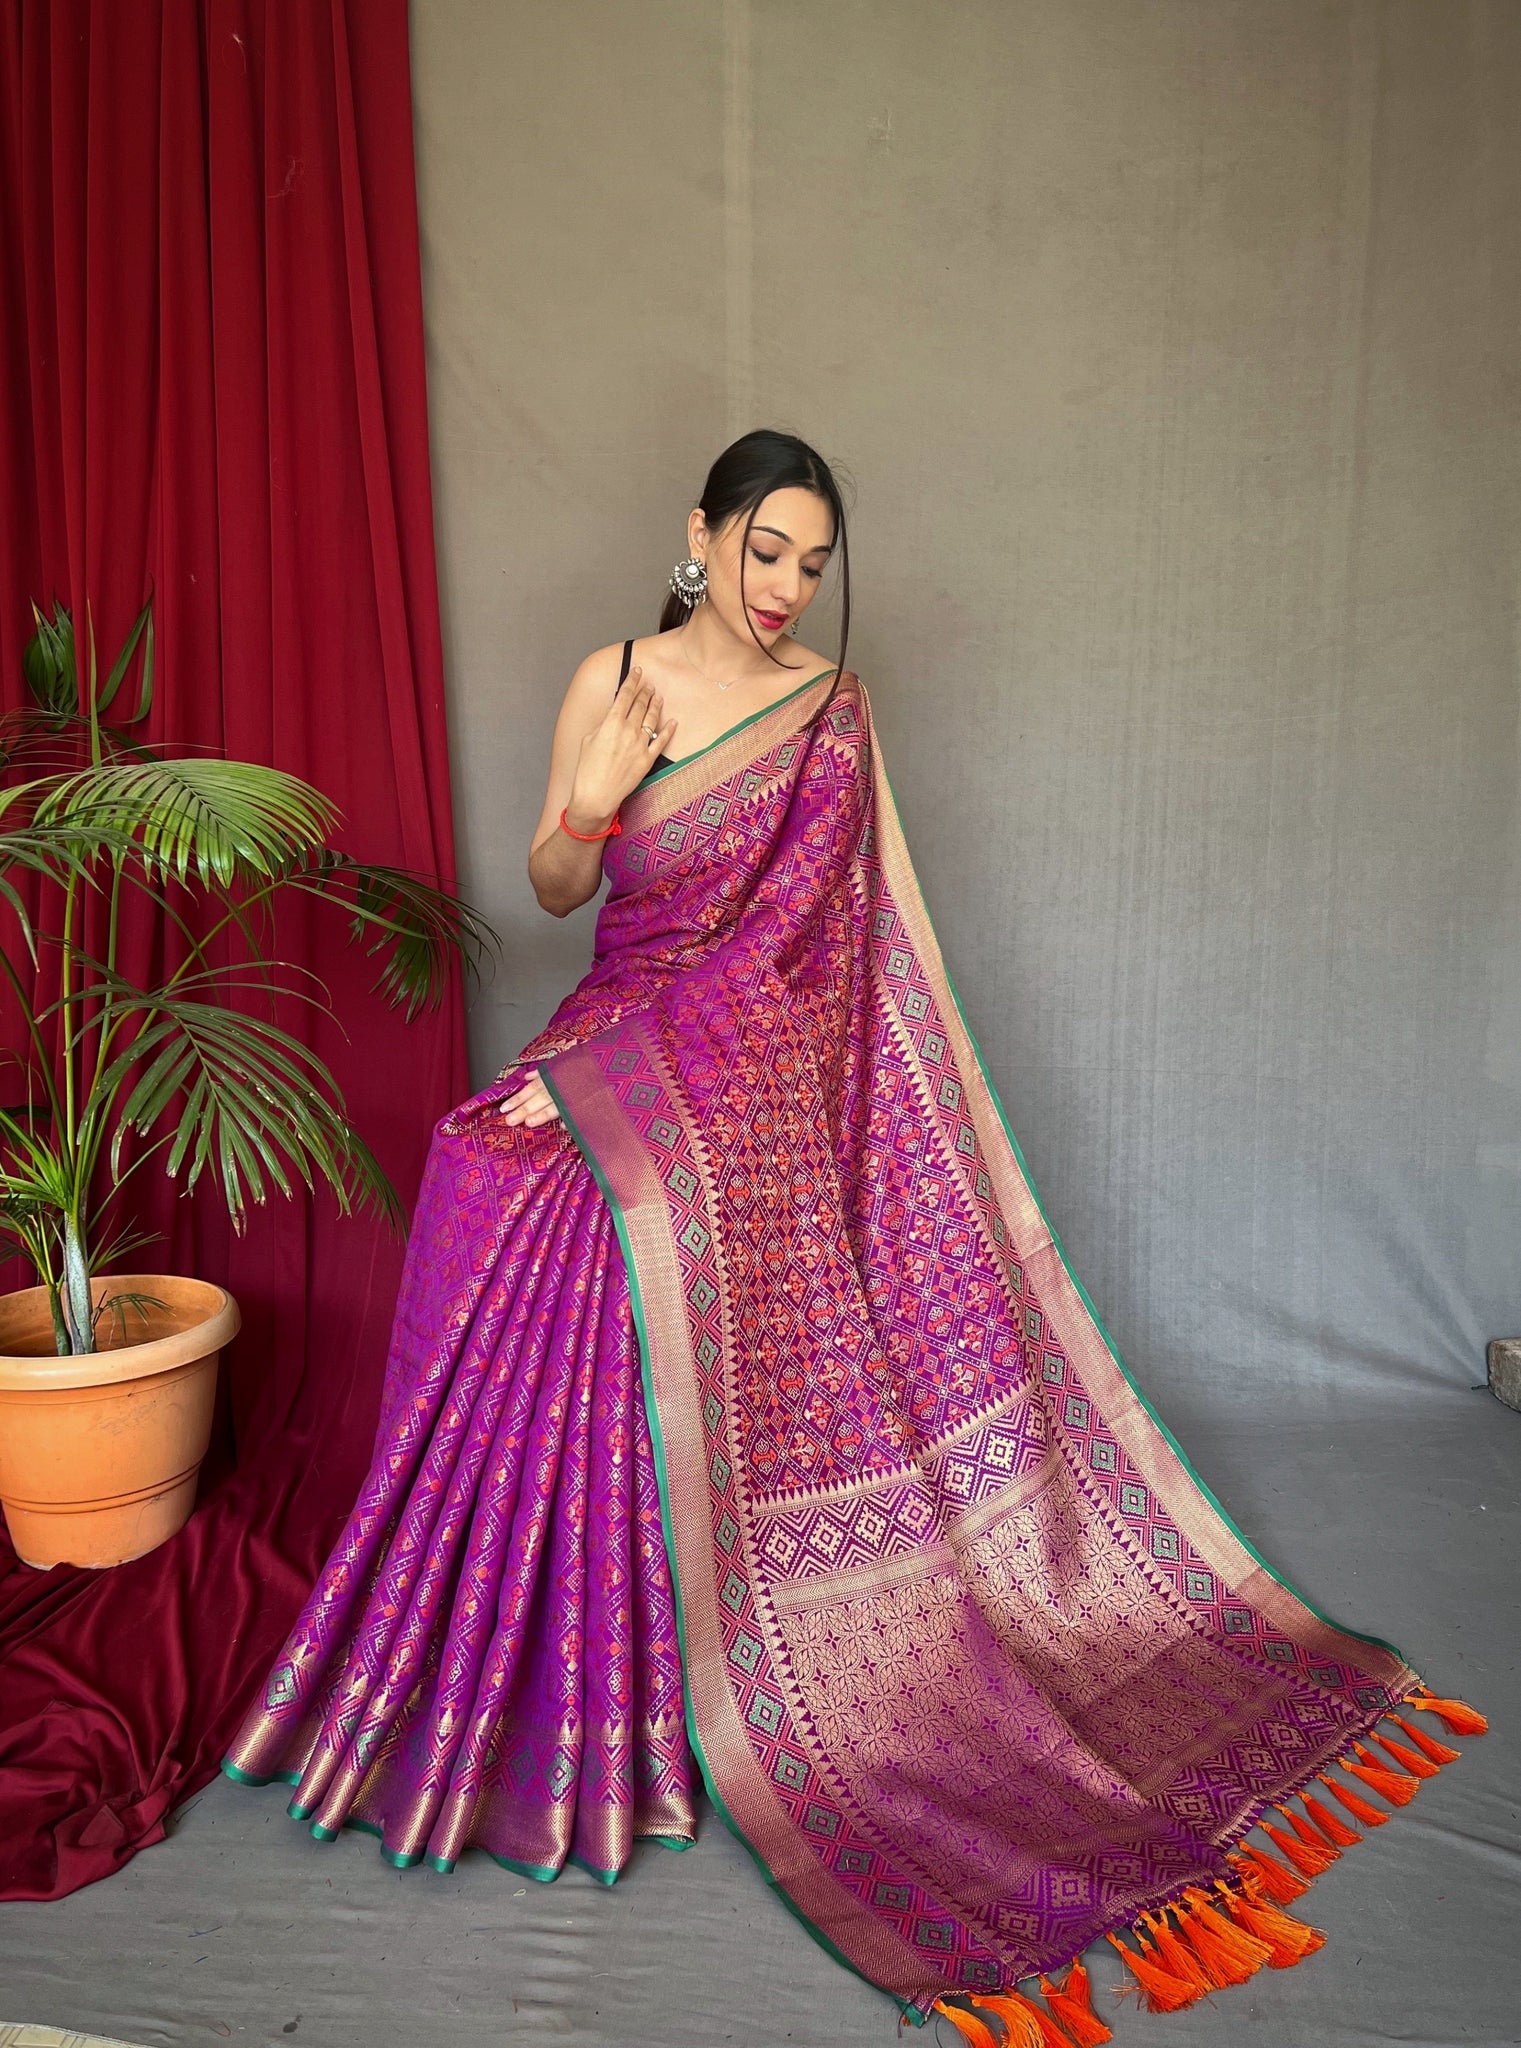 get attractive wedding look with this beautiful purple saree – FOURMATCHING